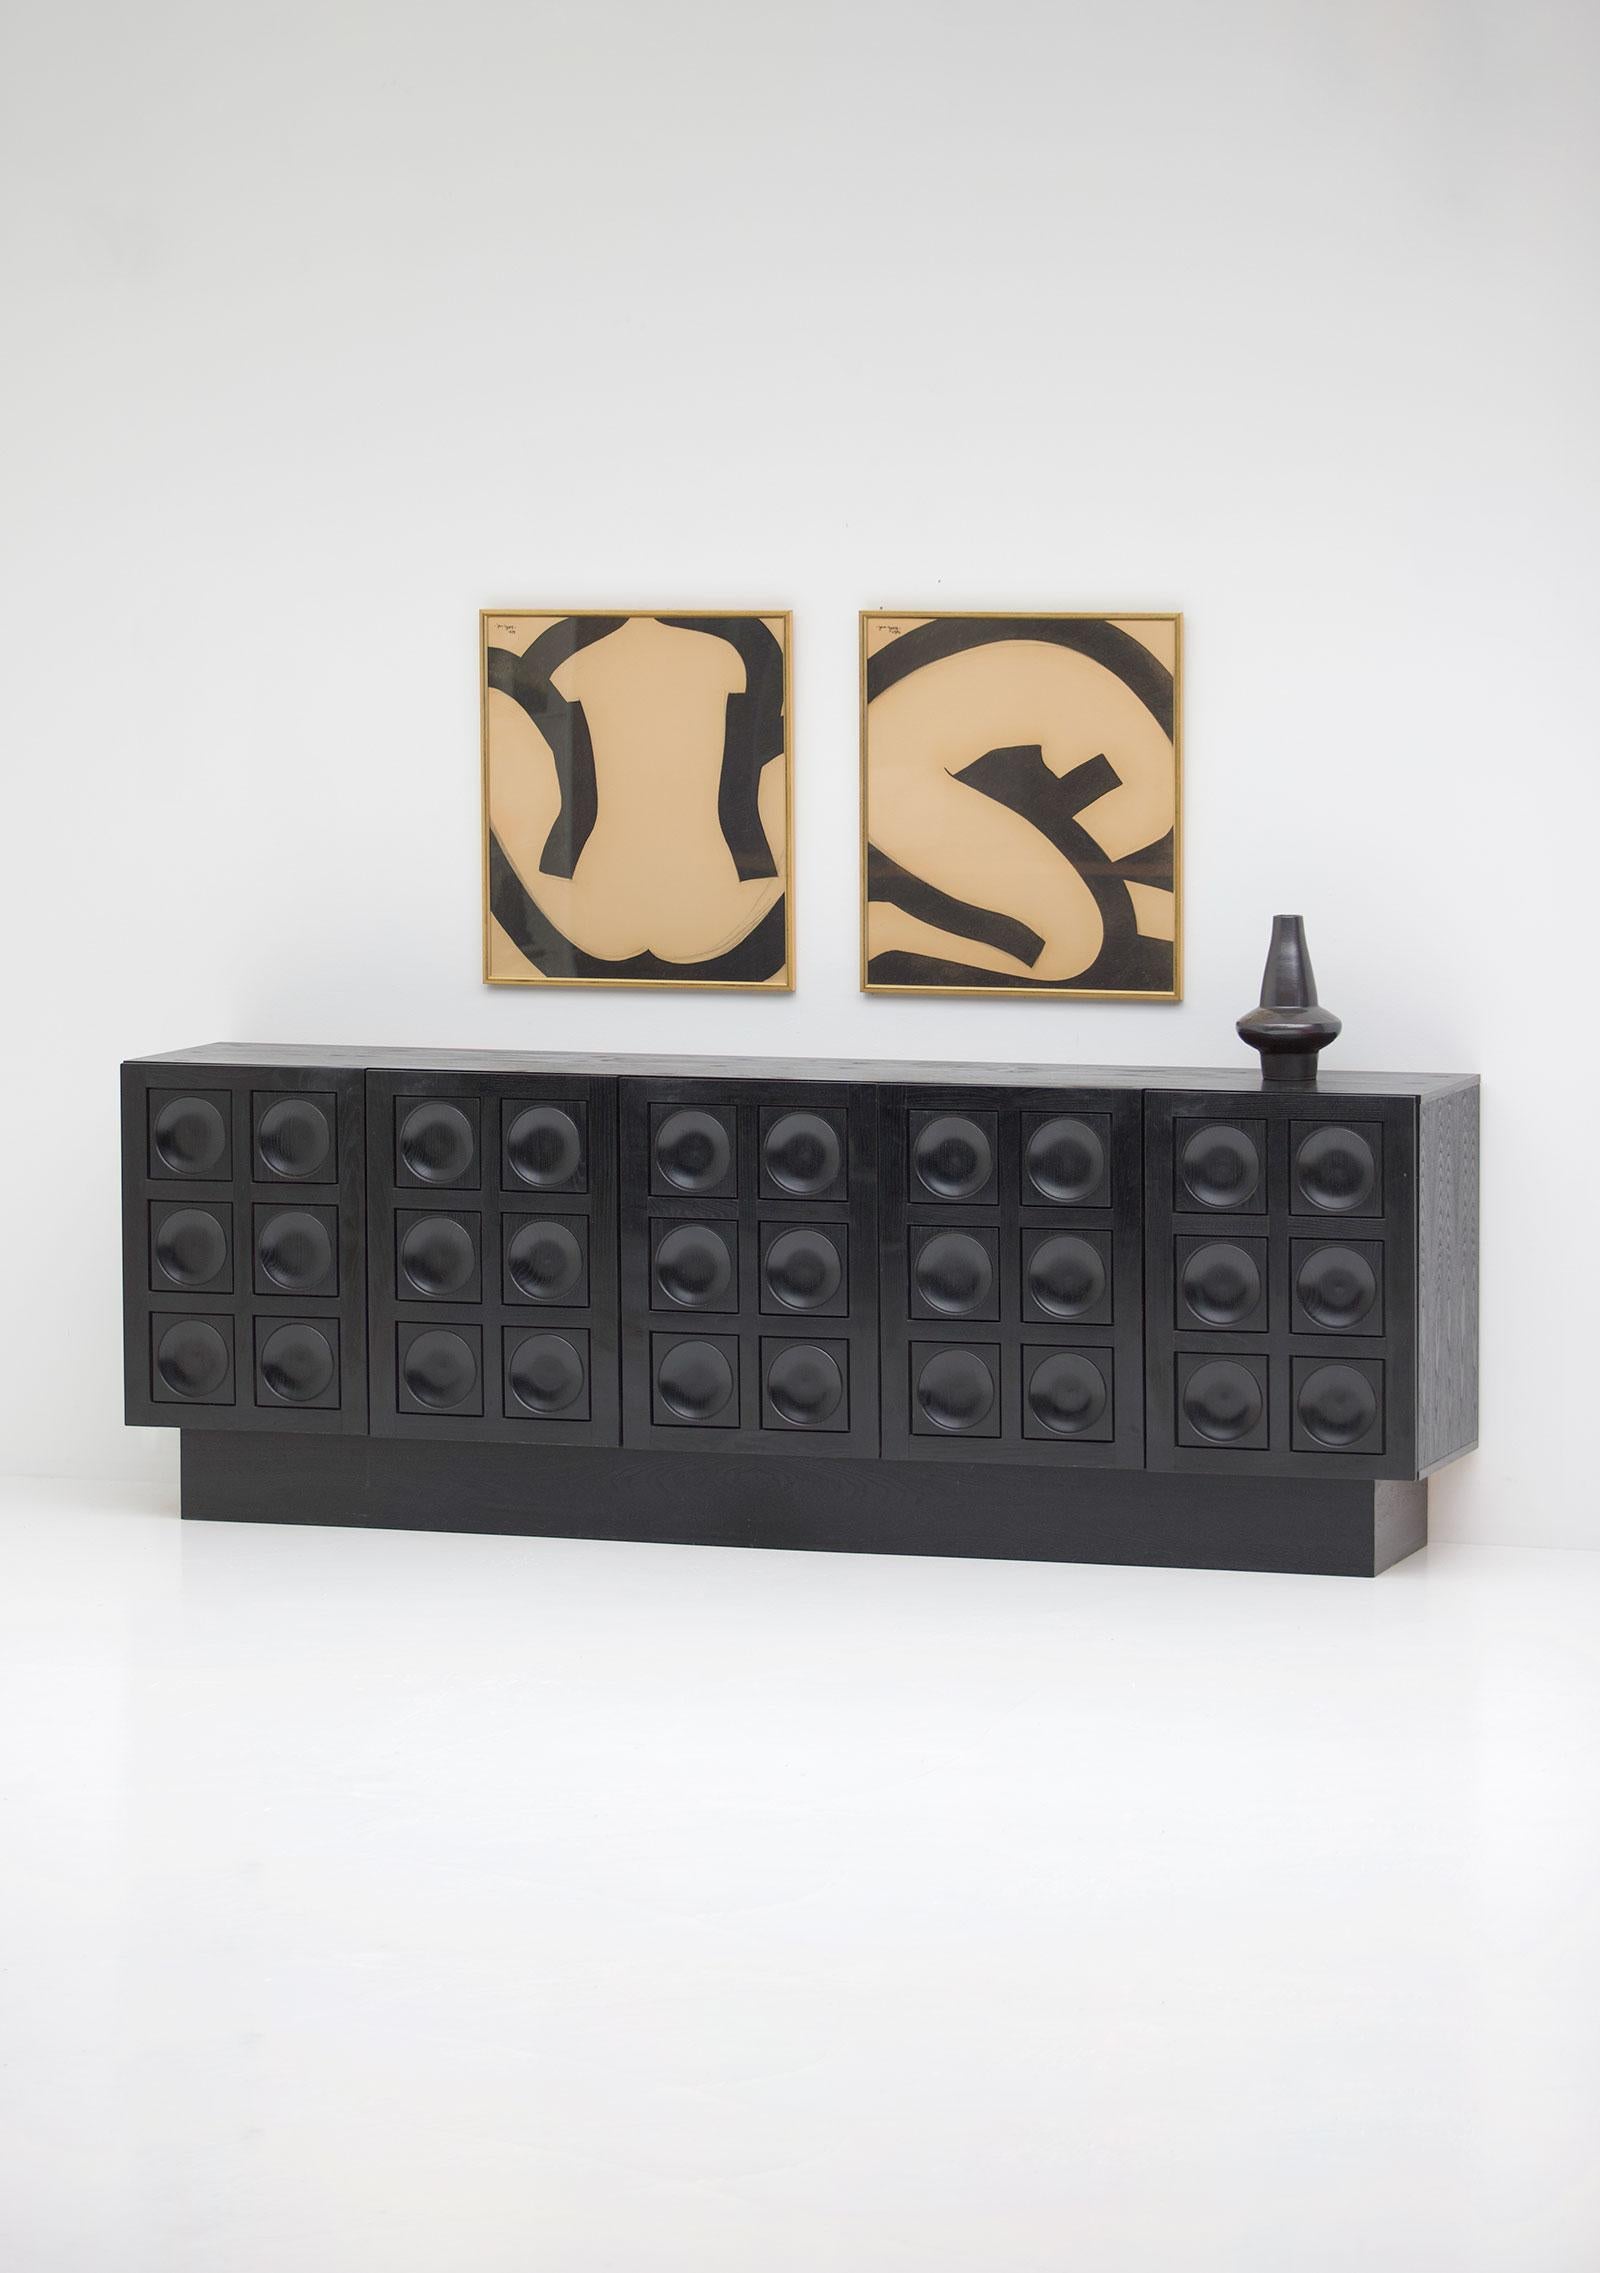 Belgian modern dresser, De Coene, Brutalist, 1970s

Black Brutalist sideboard from the 1970s. The credenza shows a beautiful graphical front which is nicely detailed and decorated with circles. Plenty of storage space can be found behind all five